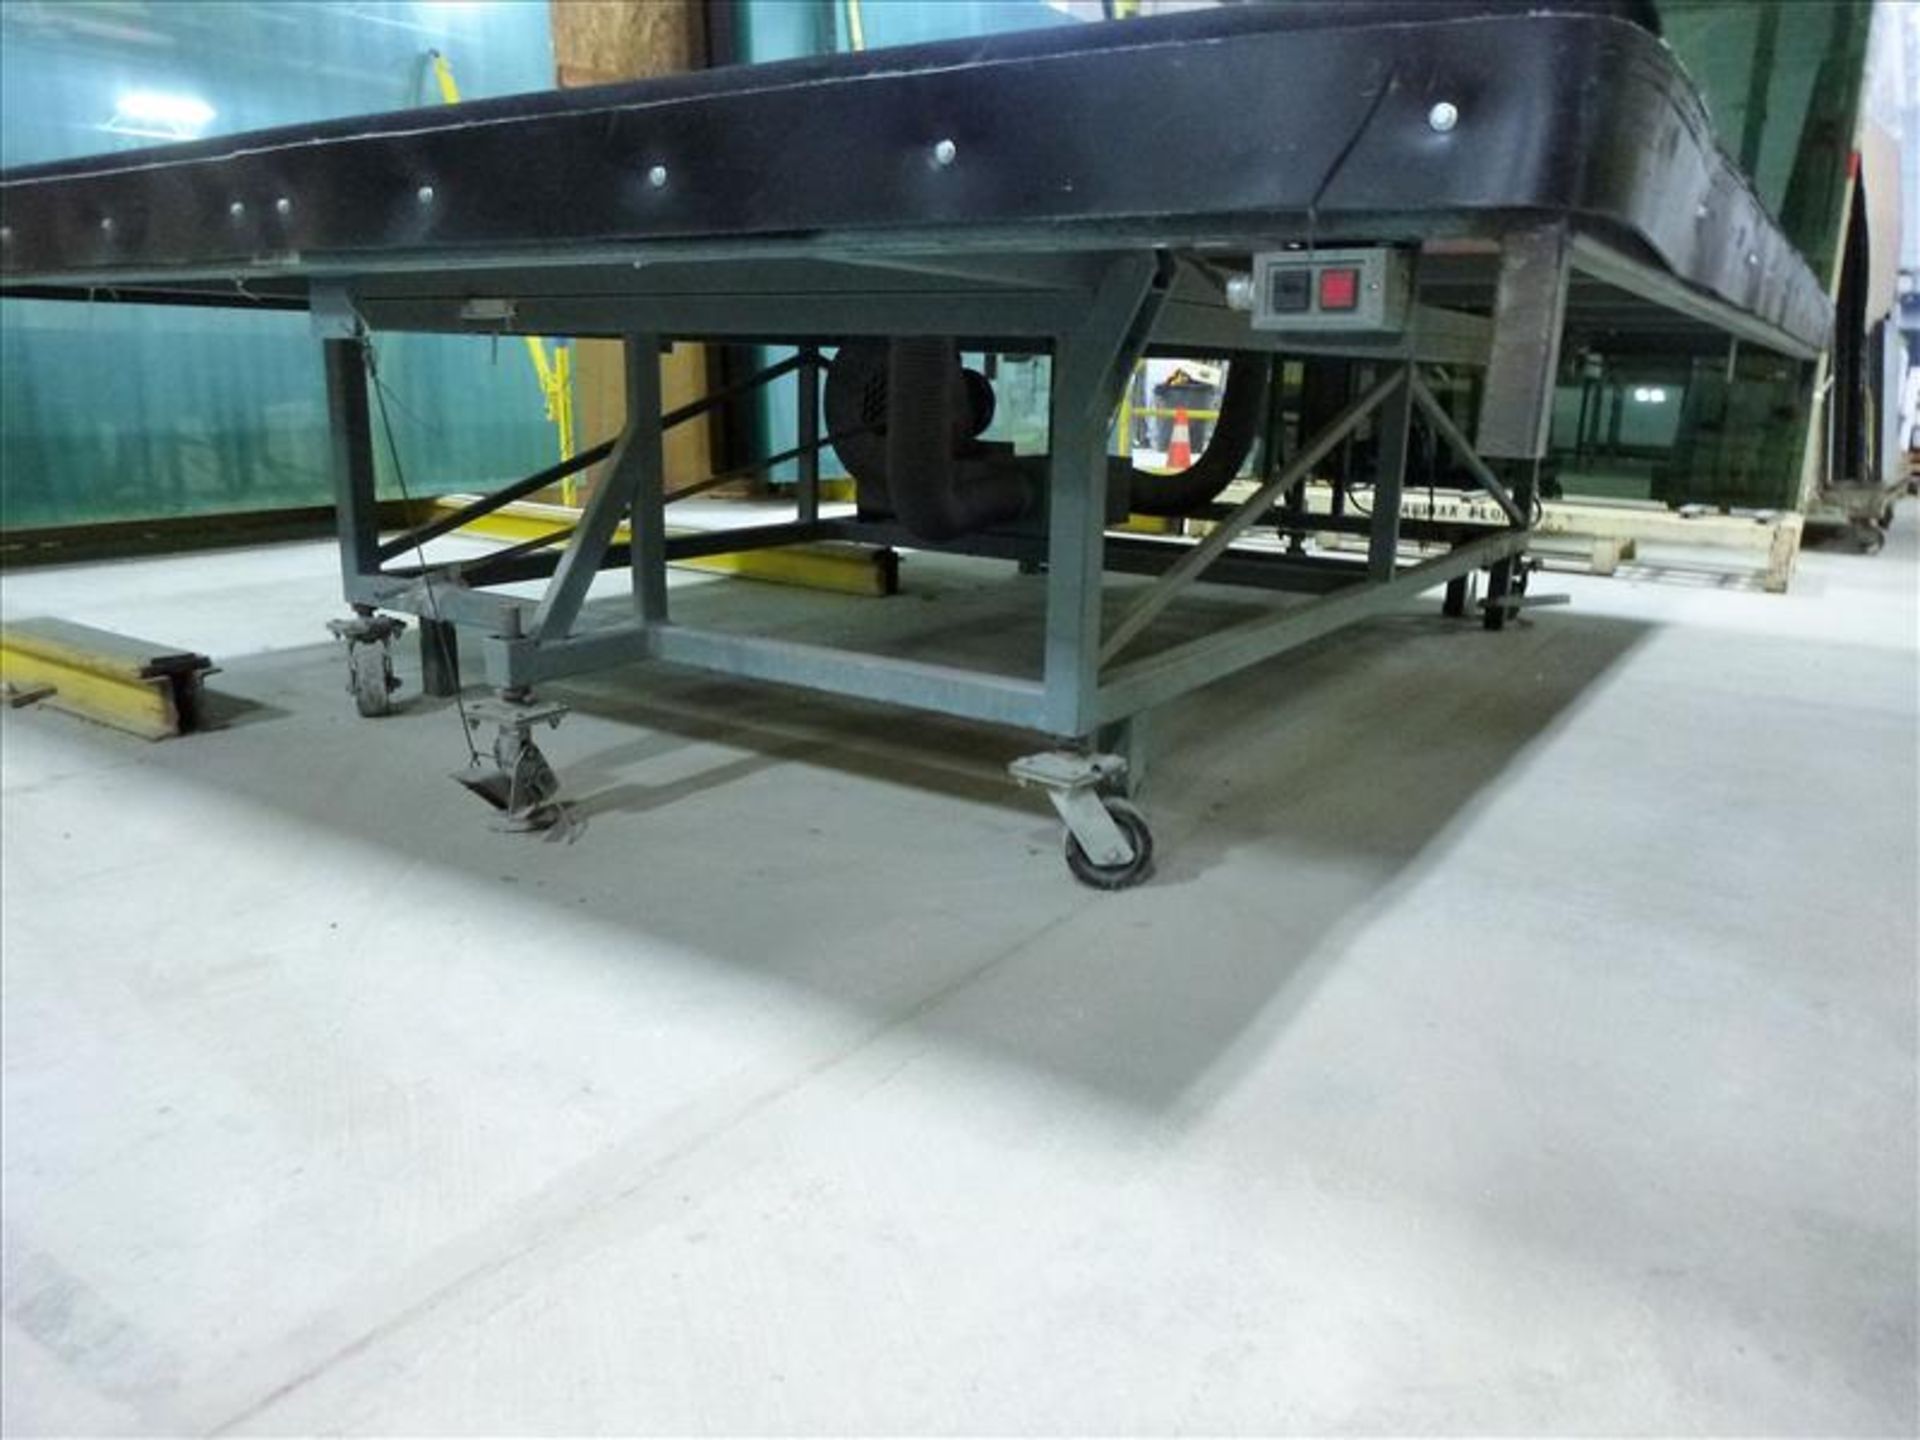 9' x 12' glass cutting air table (removal restrictions apply) - Image 2 of 2